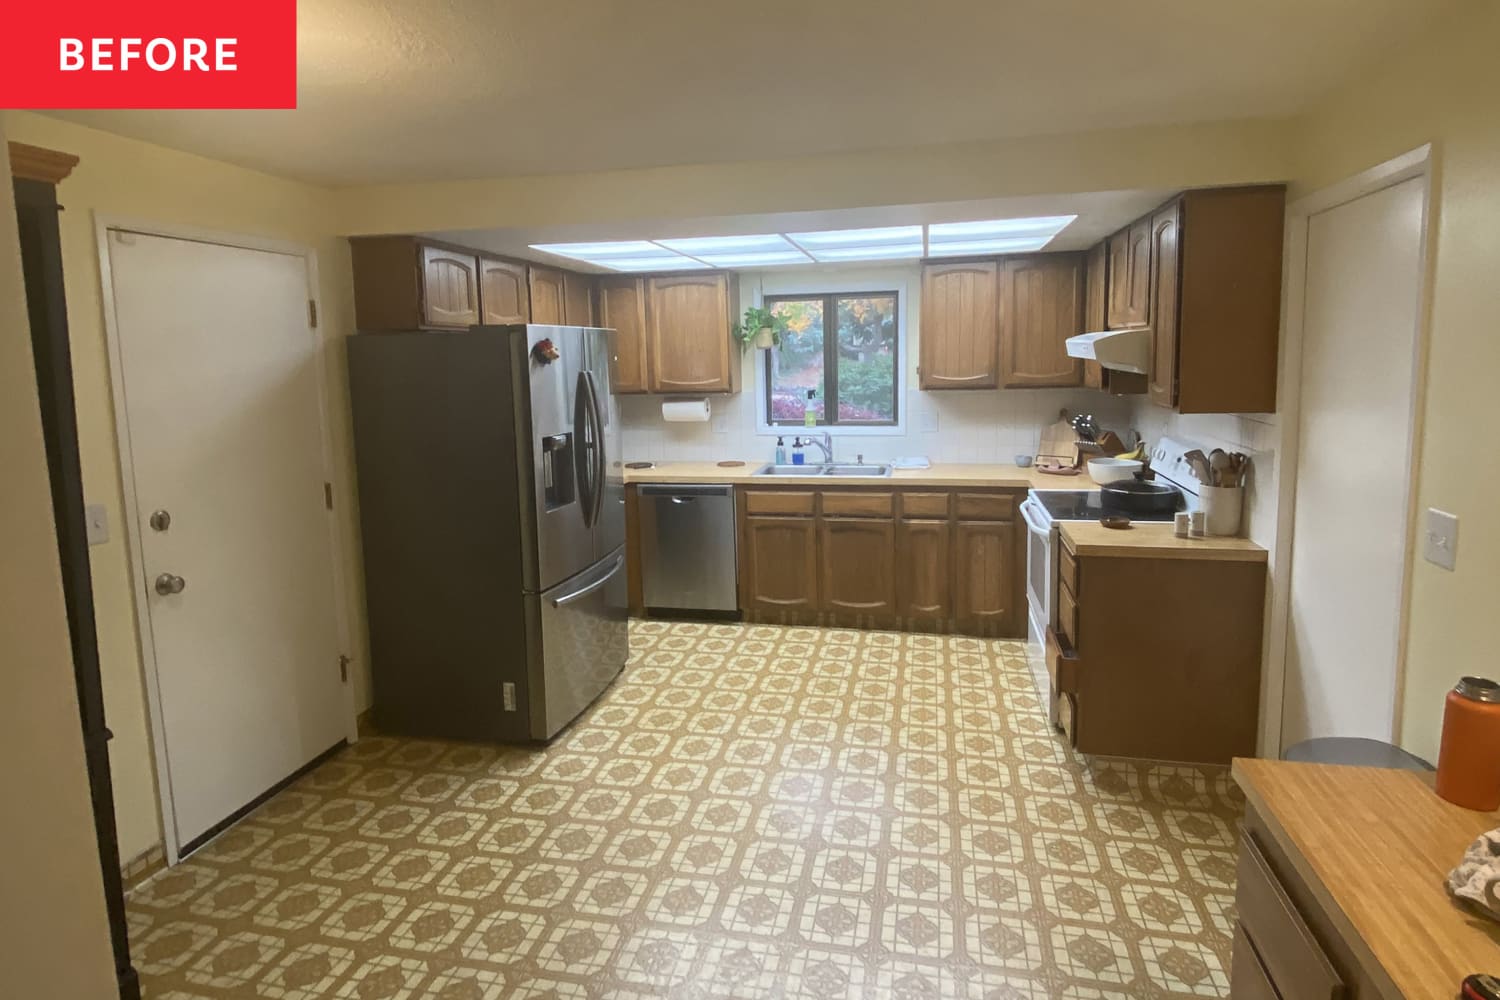 Before and After: A Cabinet Overhaul Helps This ’70s Kitchen Maximize Space and Natural Light